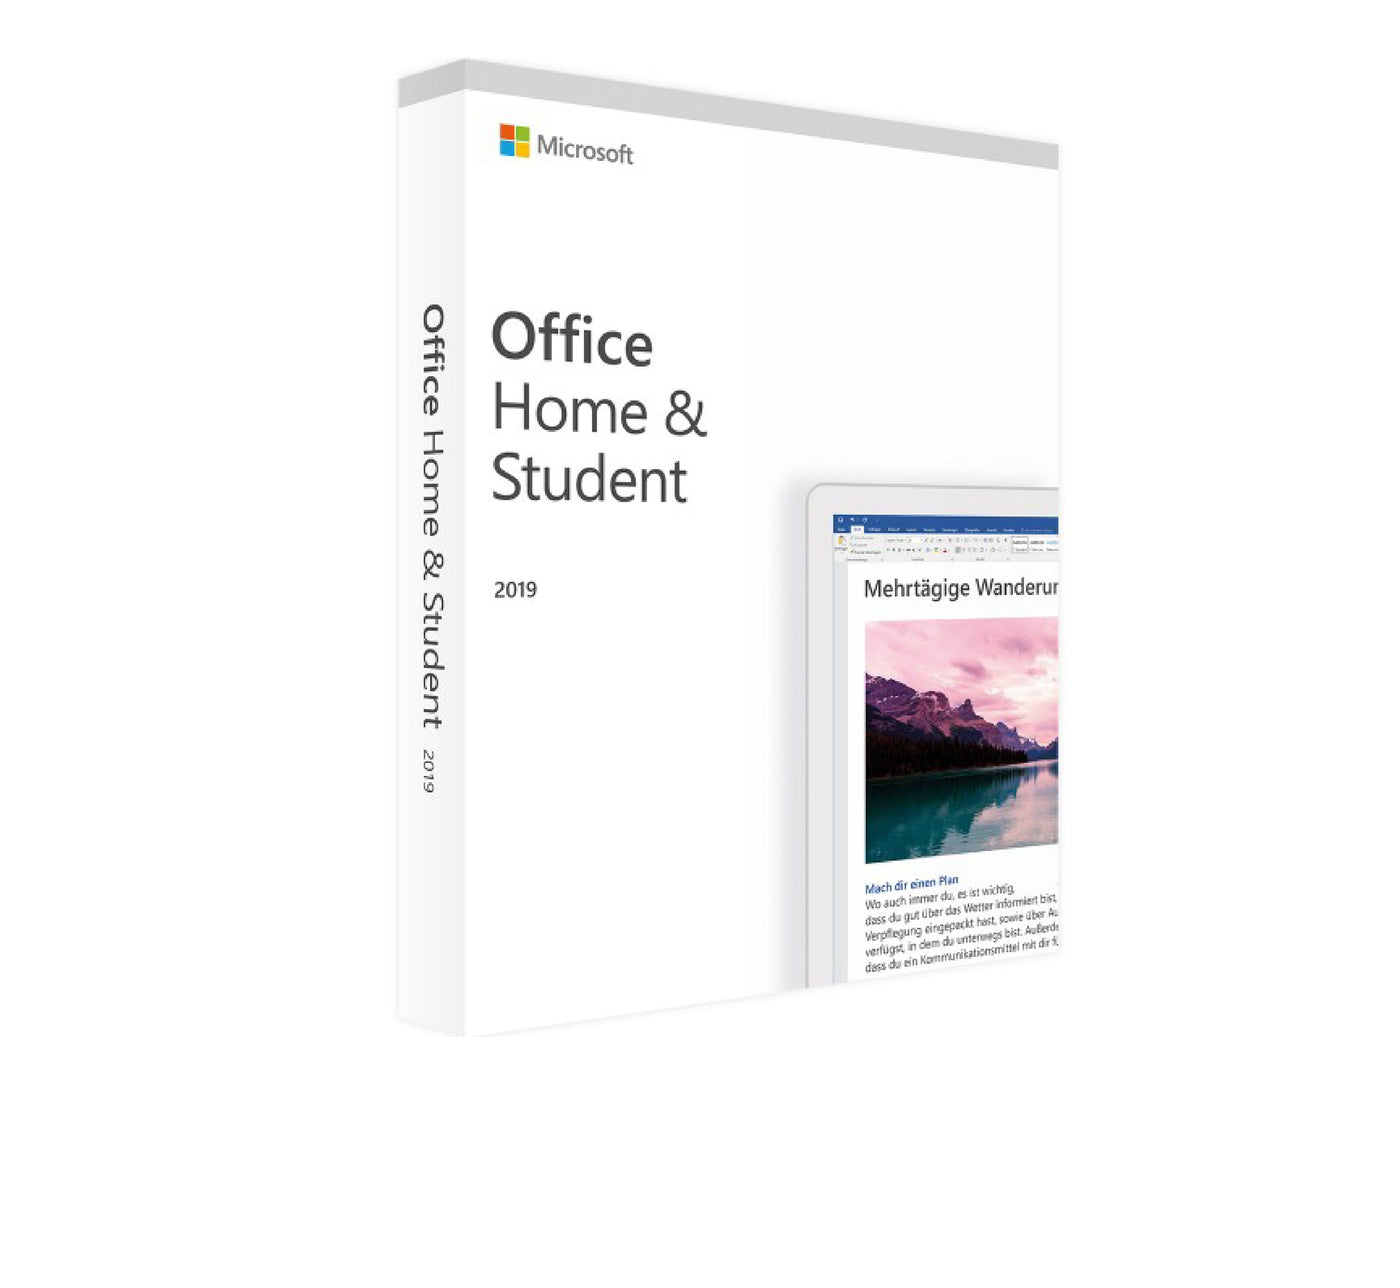 #Microsoft Office 2019 Home and Student Windows